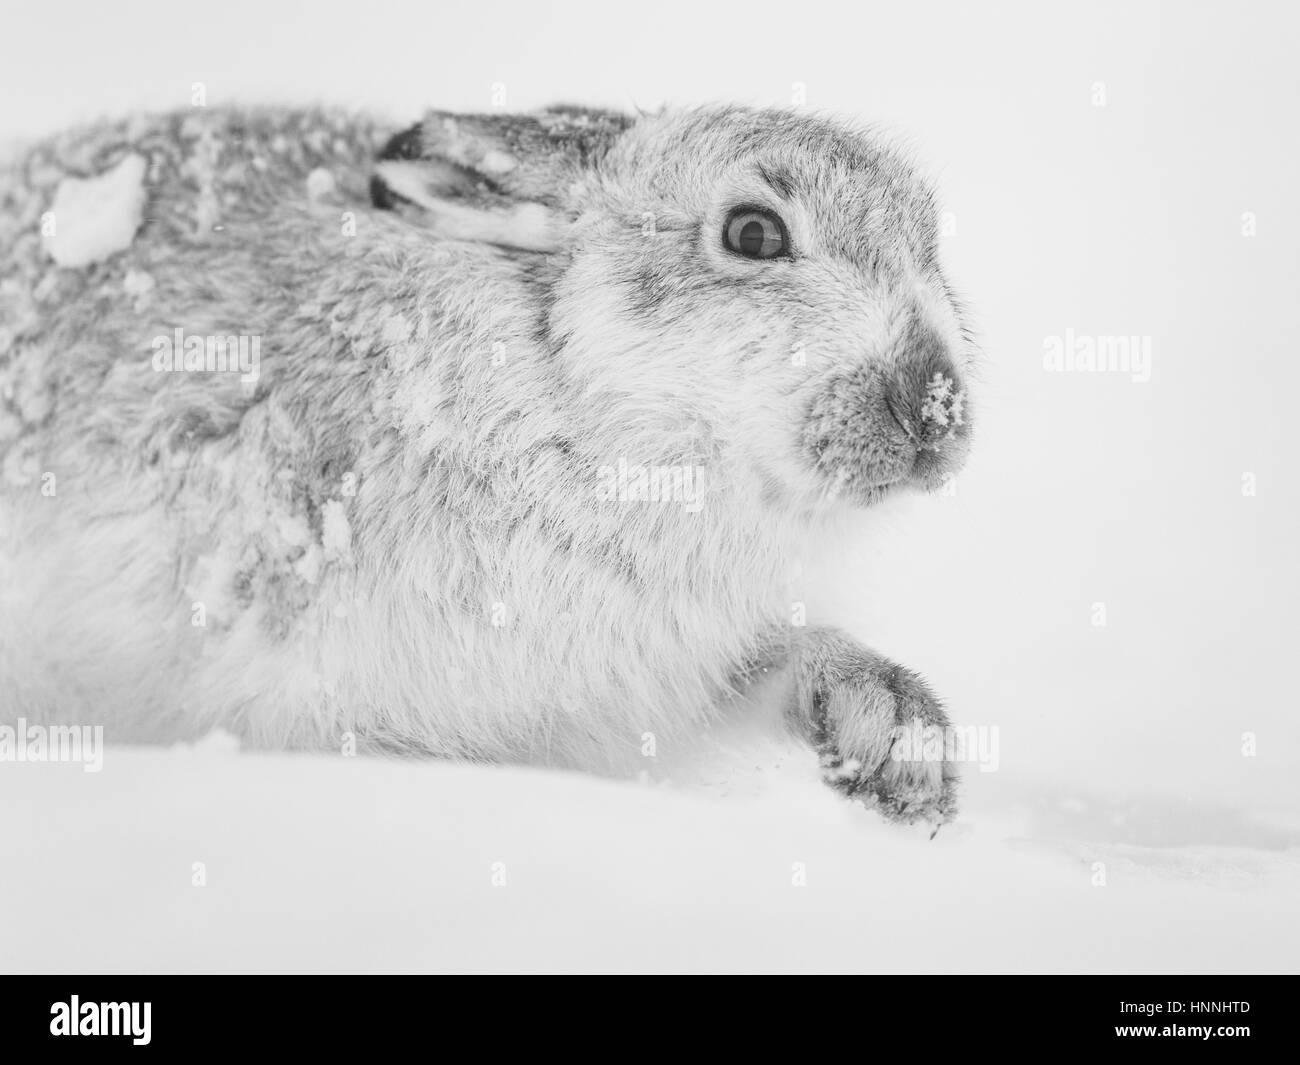 Scottish Mountain Hare (Lepus timidus) black and white walking in a snowy landscape. Cairngorms National Park, Highlands, Scotland, Great Britain Stock Photo